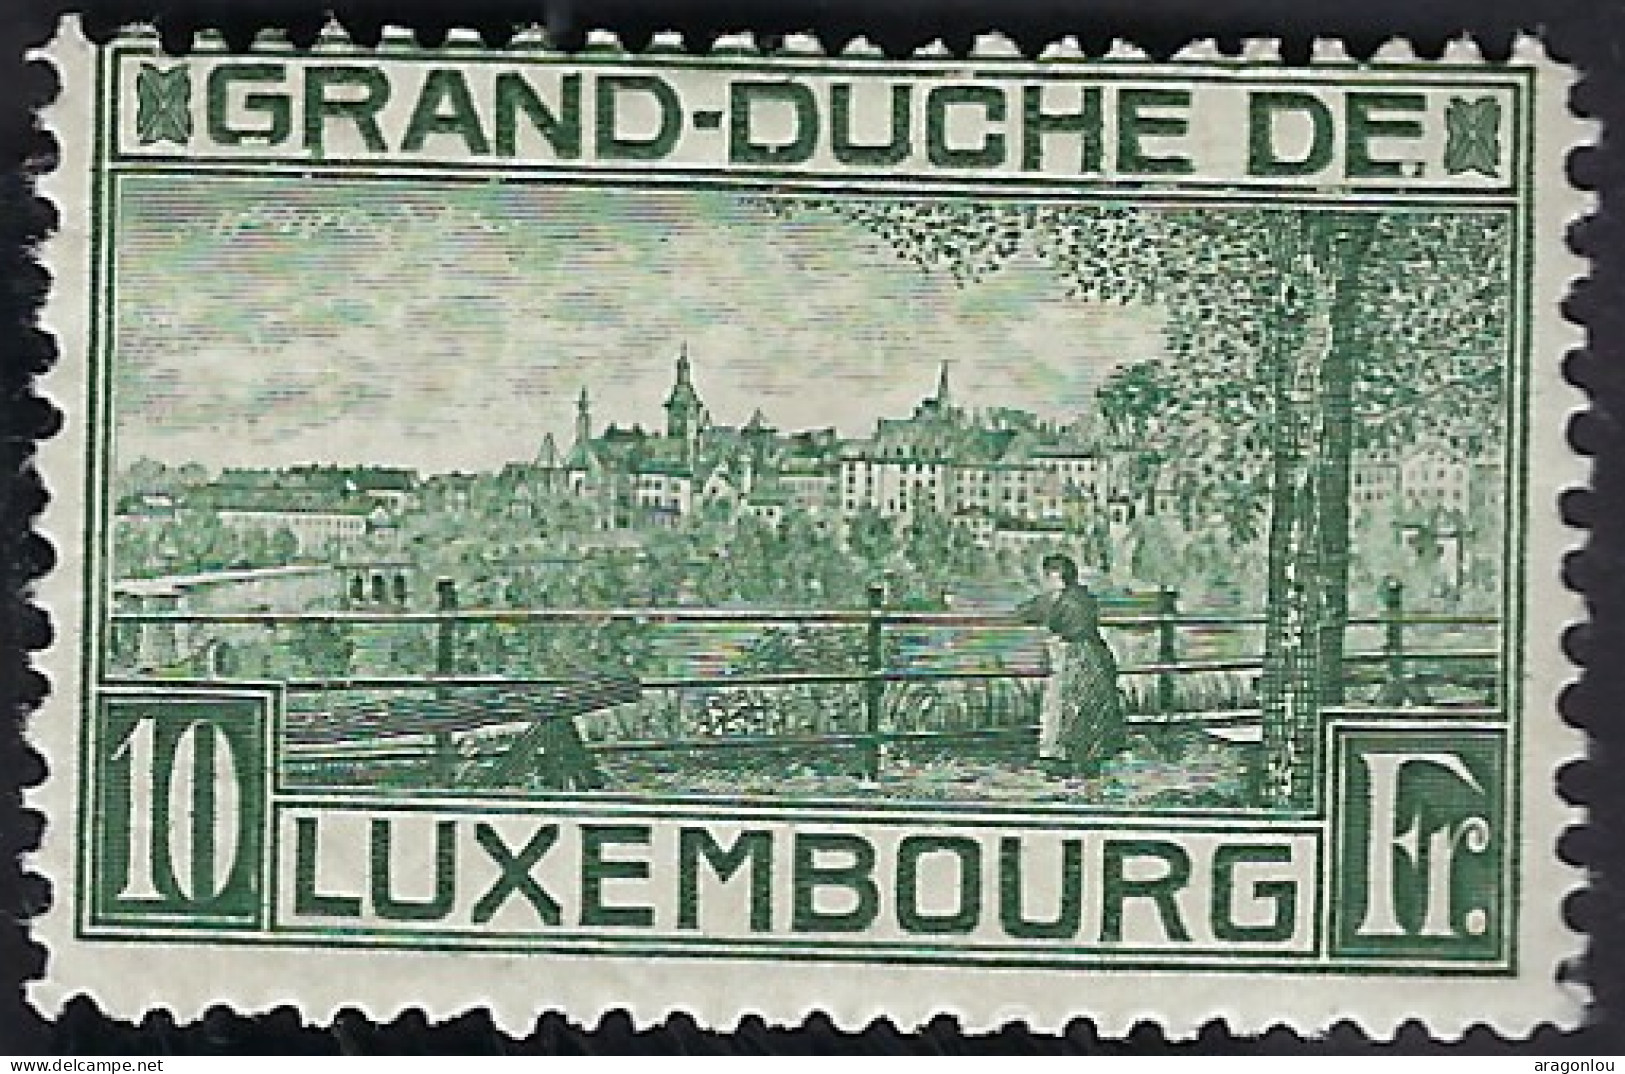 Luxembourg - Luxemburg - Timbre   1923   Naissance  Princesse Elisabeth   Michel 142   *   VC. 600,- Très Rare - Used Stamps